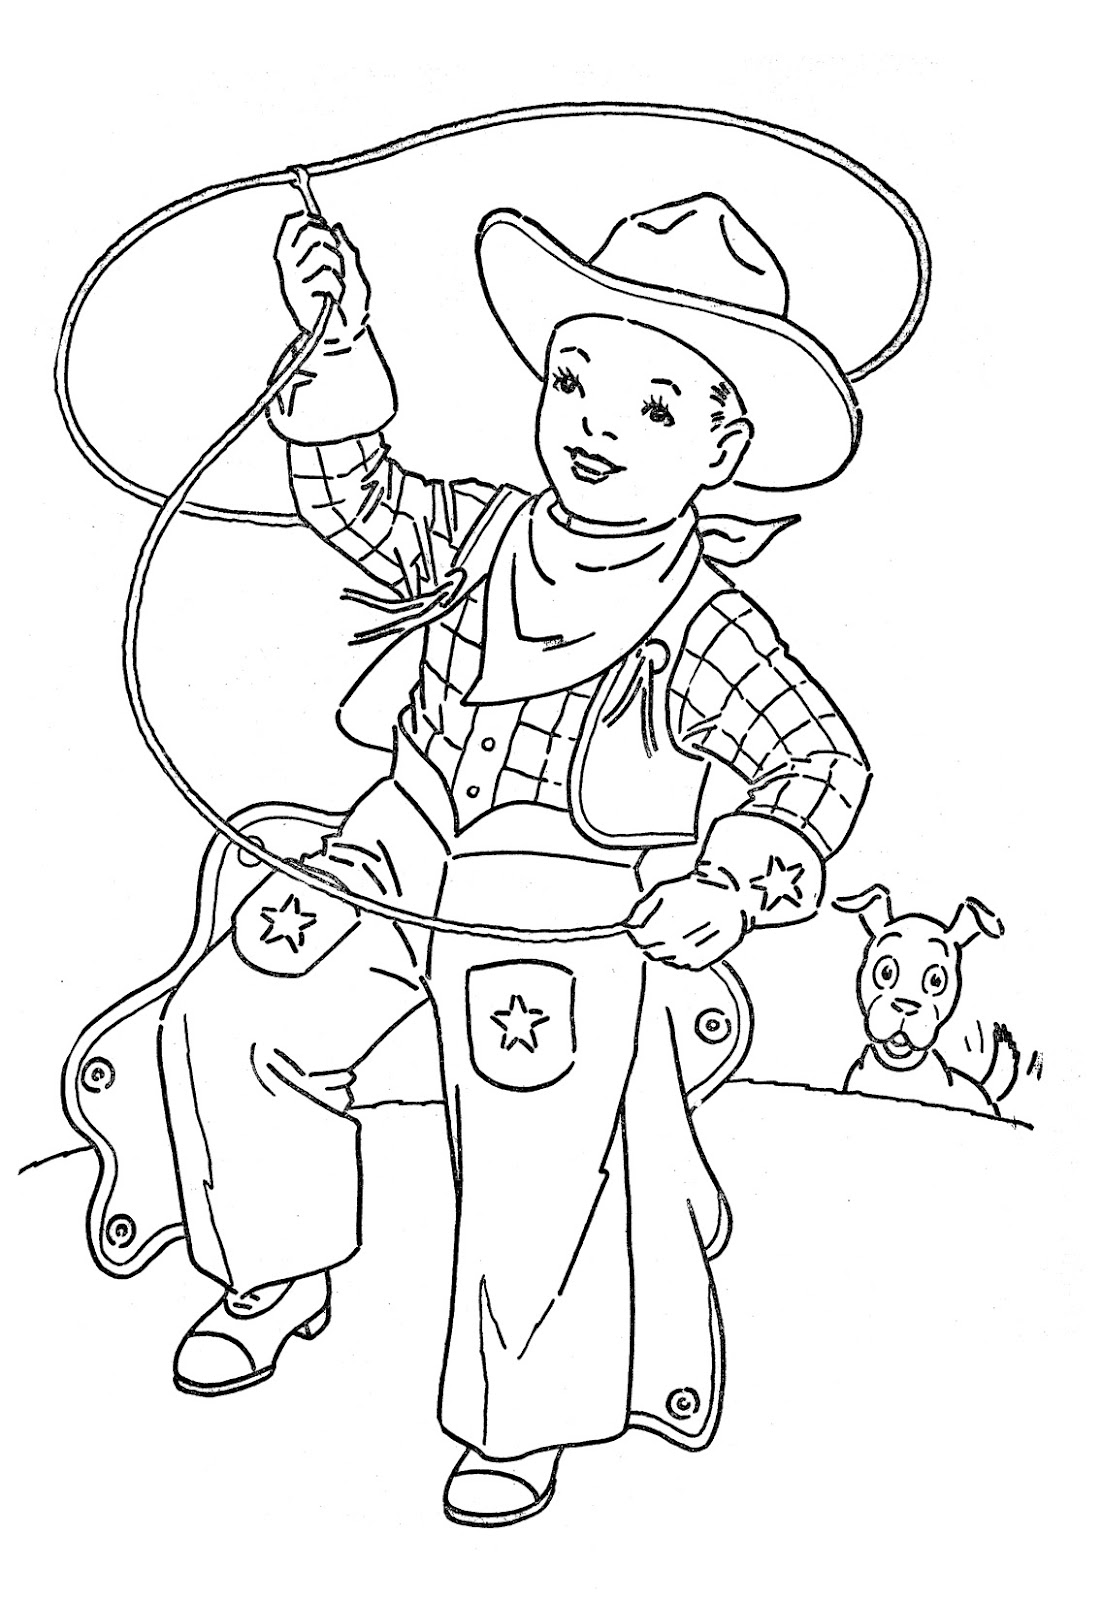 drawing cowboy 91551 characters printable coloring pages